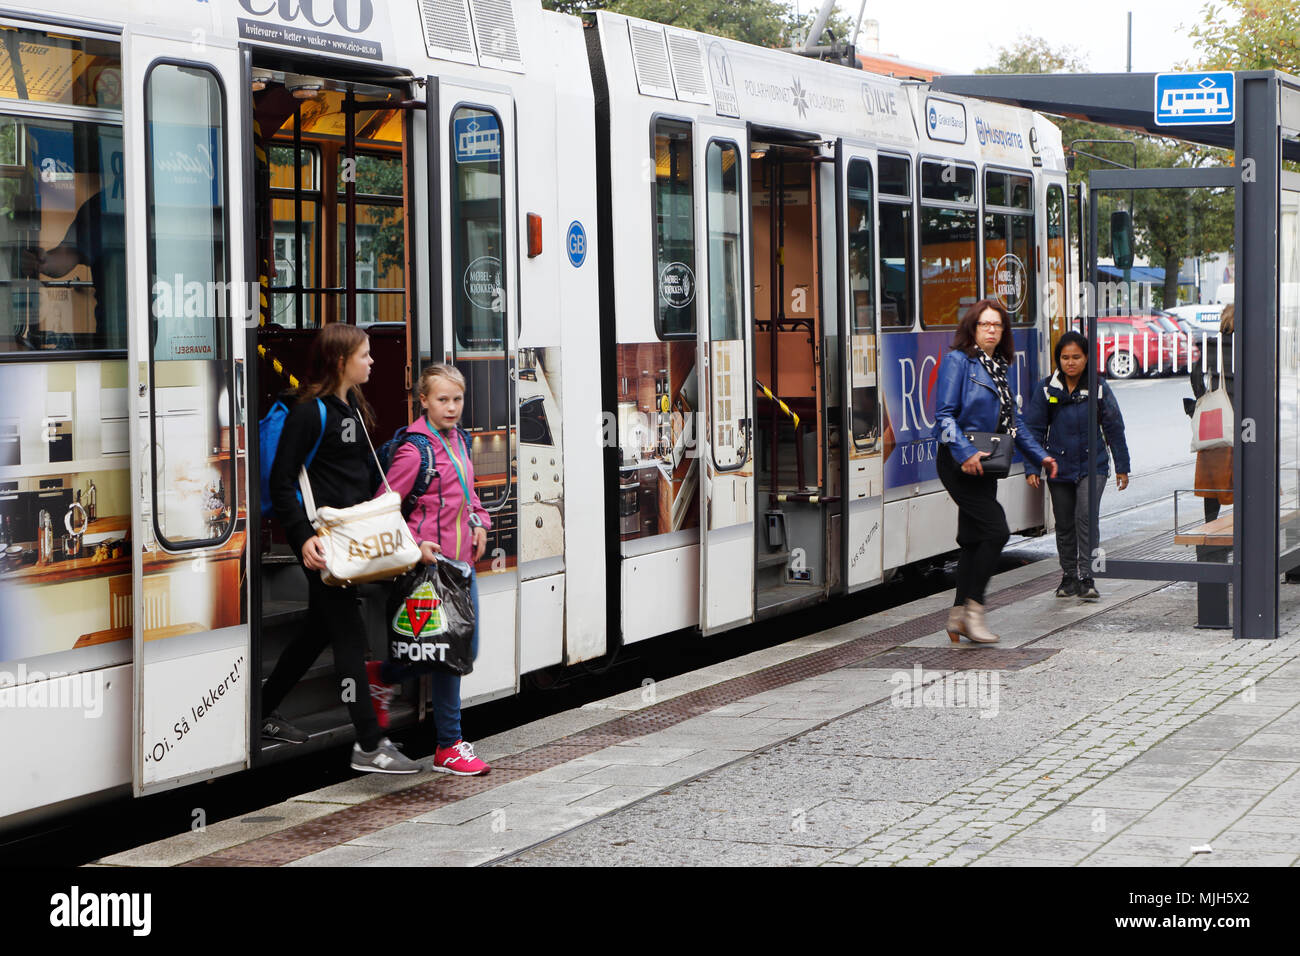 Trondheim, Norway - Sepember 30, 2016:  Passengers get off  an articulated tram at the tram stop on St. Oloavs gate in Trondheim city center. Stock Photo